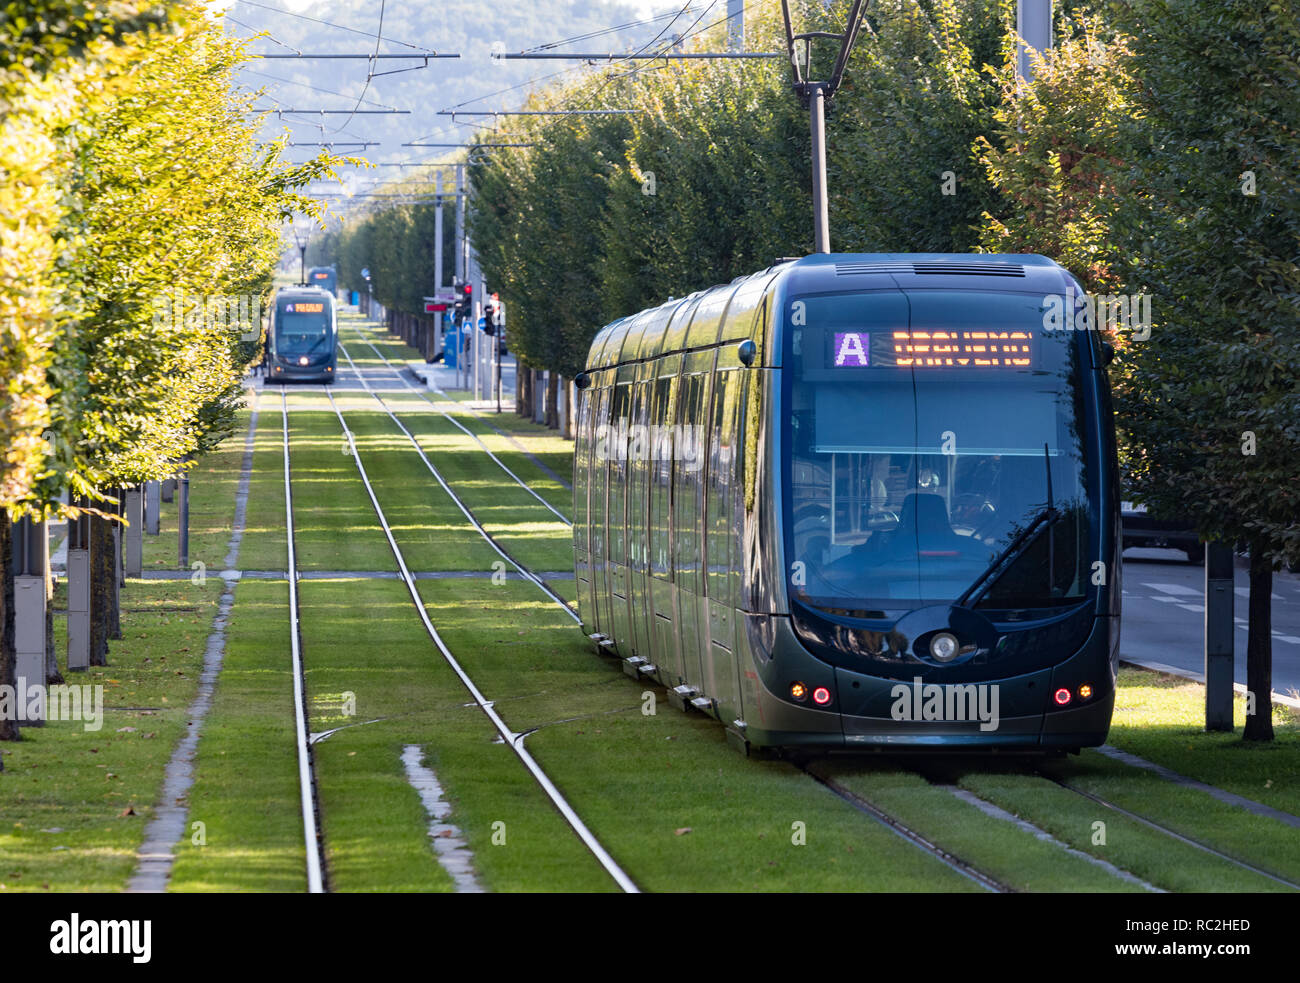 Bordeaux, France - 27th September, 2018: Modern public tranport trams passing through tree lined streets in the city of Bordeaux. Stock Photo